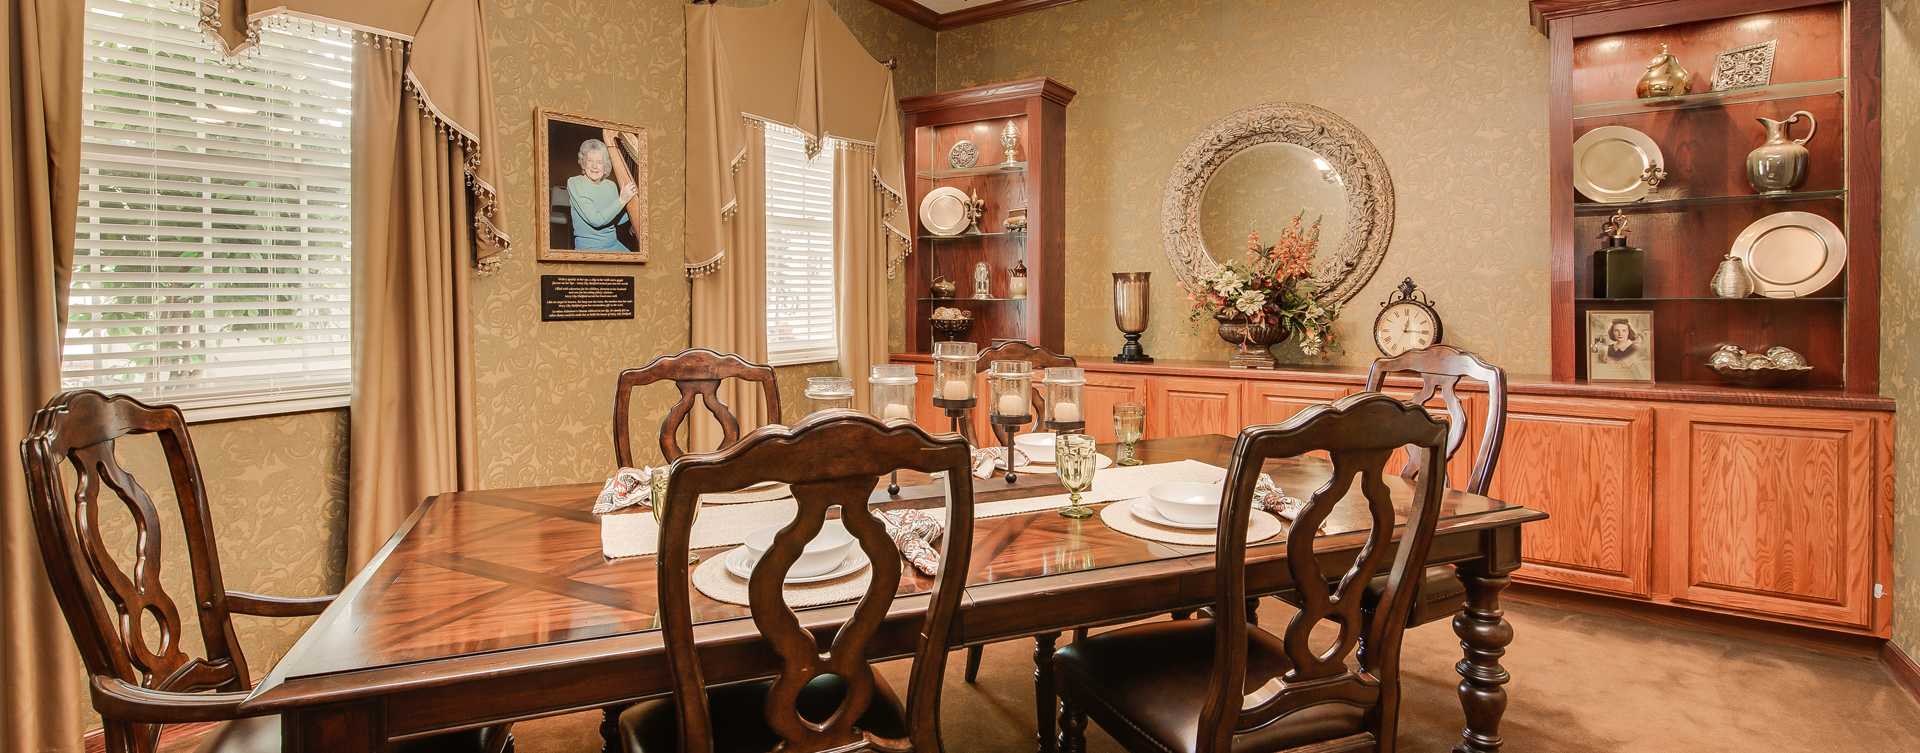 Celebrate special occasions in the private dining room at Bickford of Portage